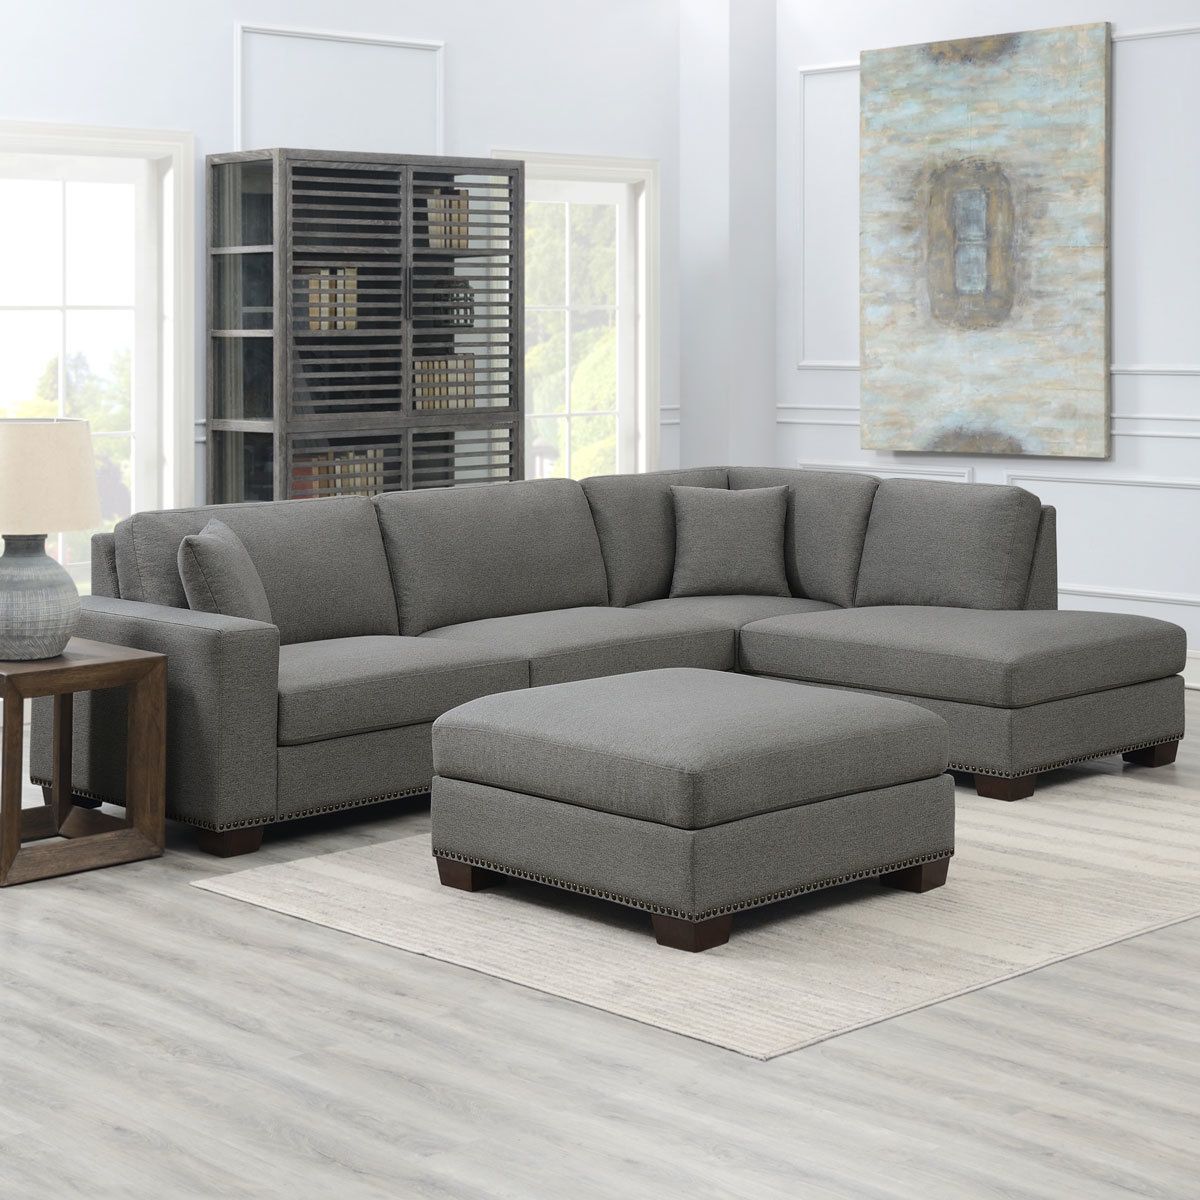 Thomasville Artesia Grey Fabric Sectional Sofa With Ottoman, Right In Sofas With Ottomans (Gallery 12 of 20)